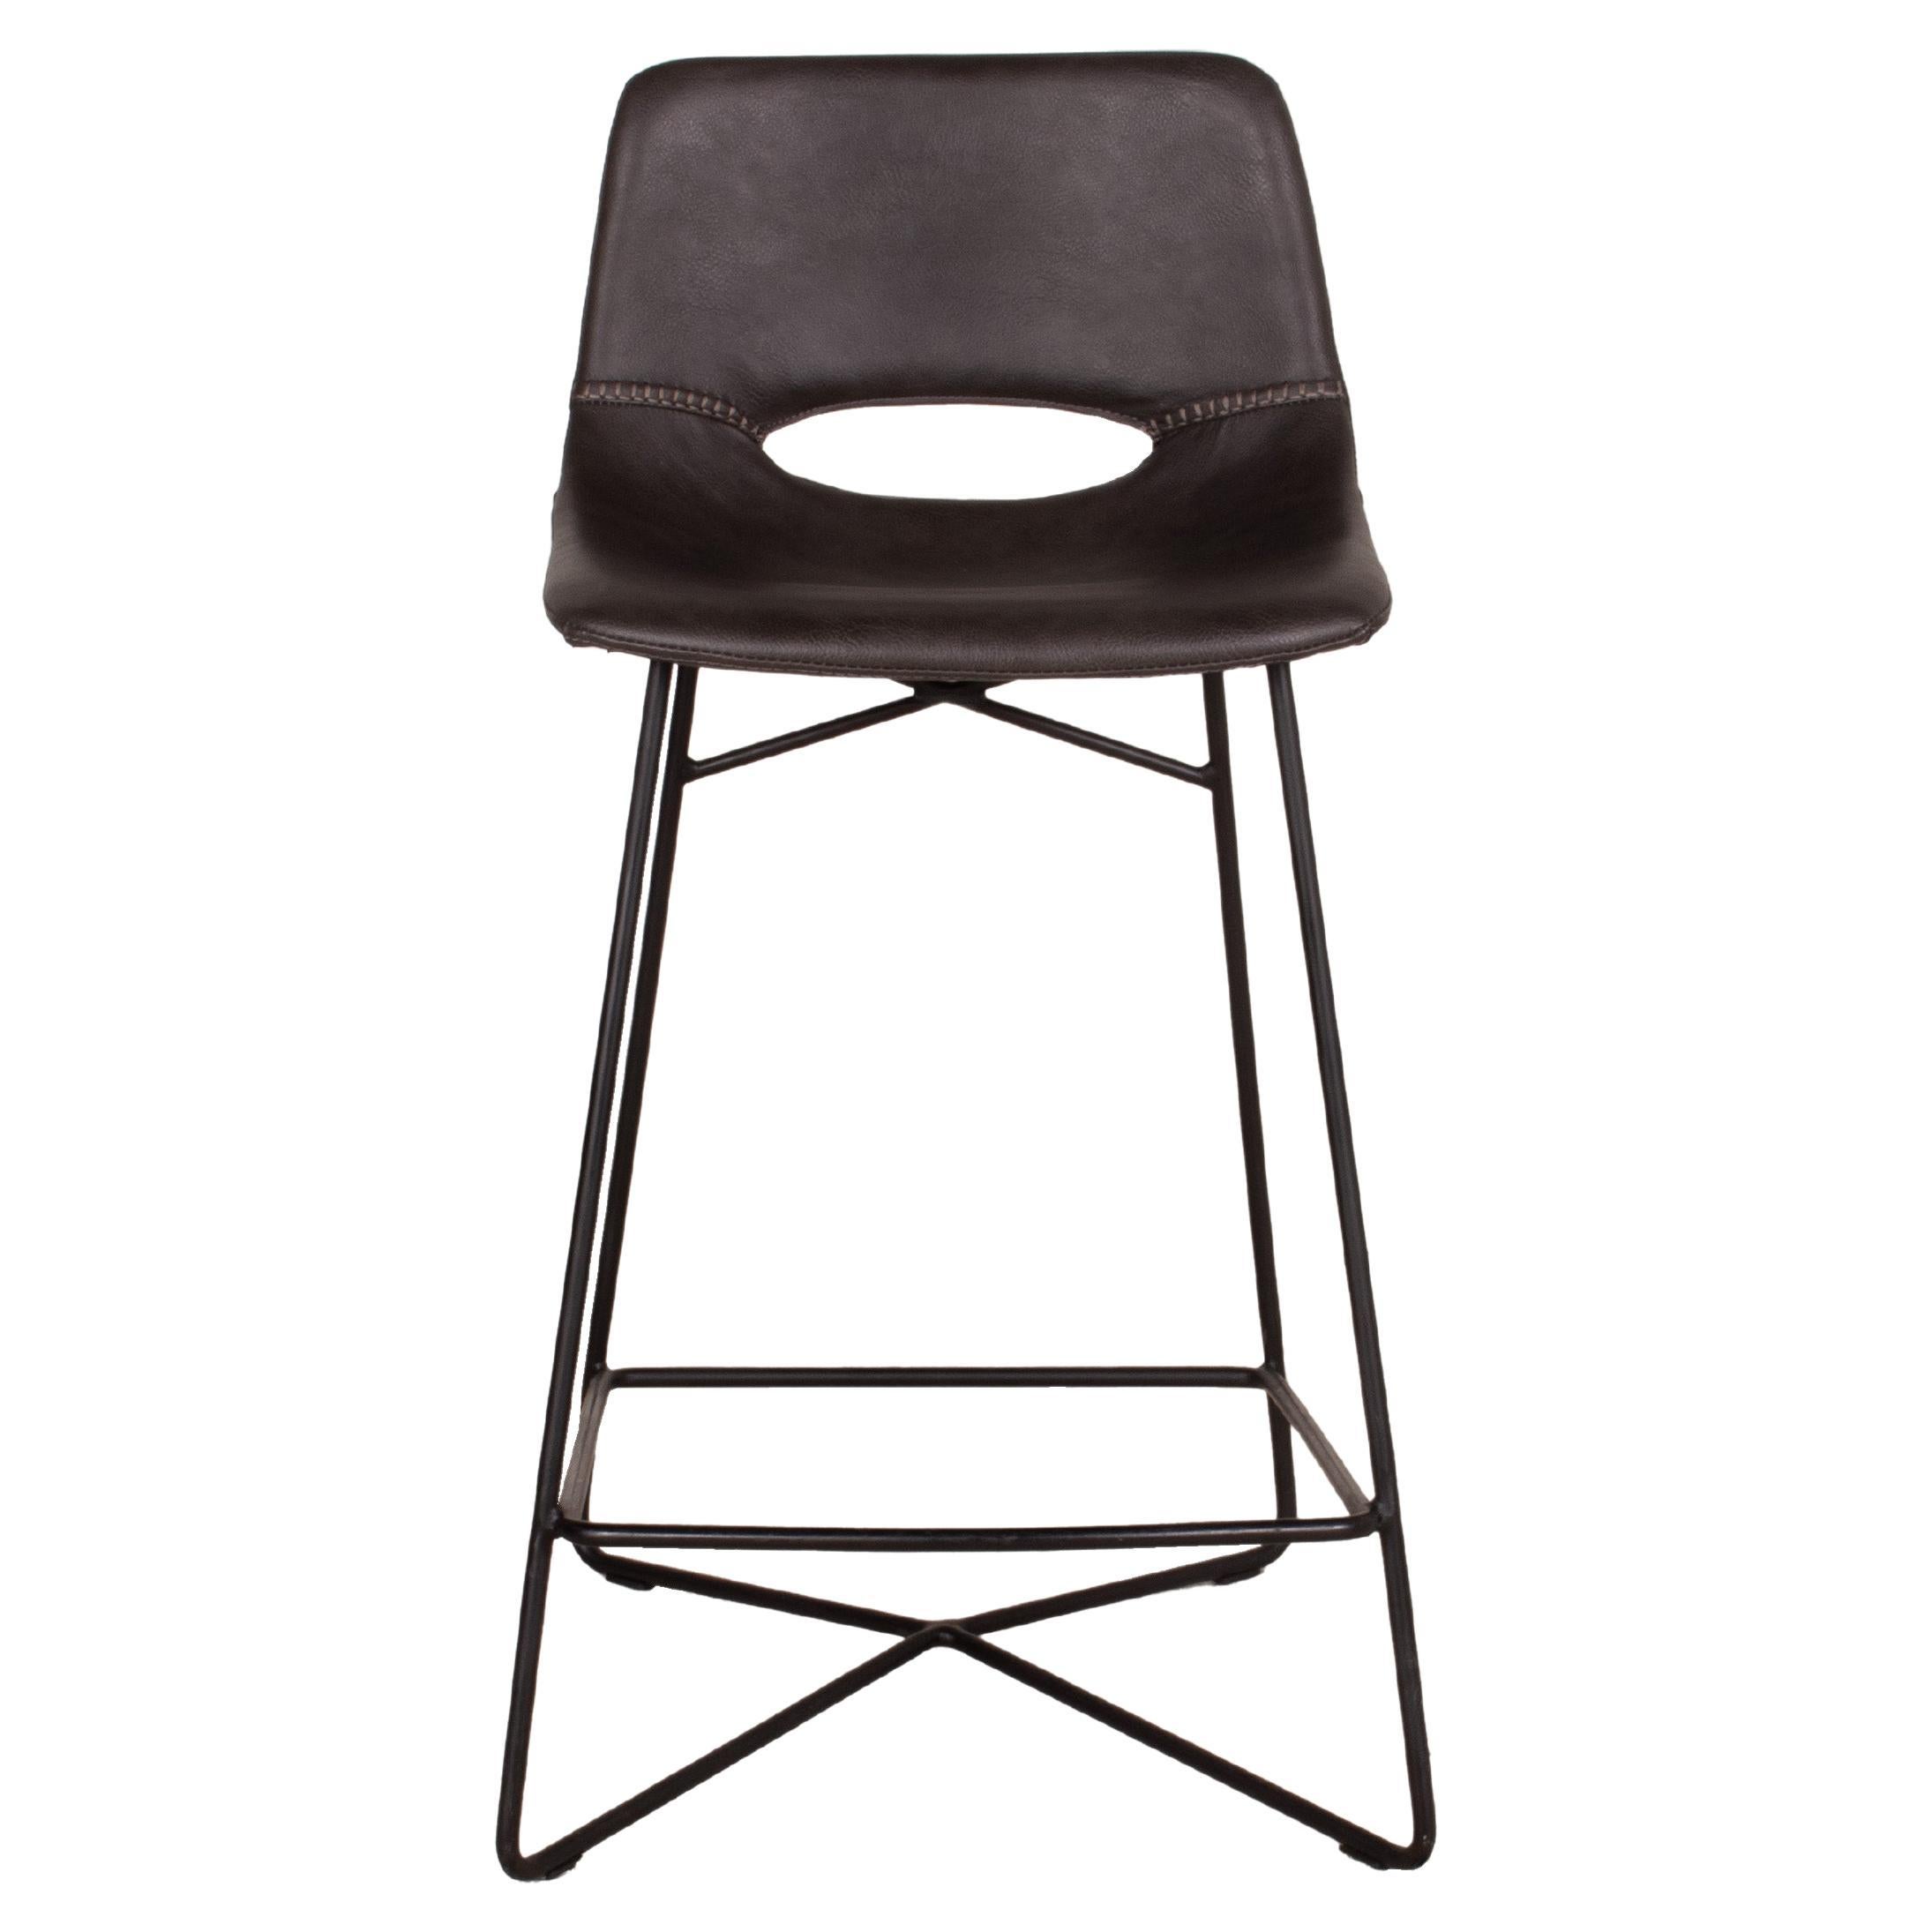 Bonded Leather and Steel Modern Bar Chair